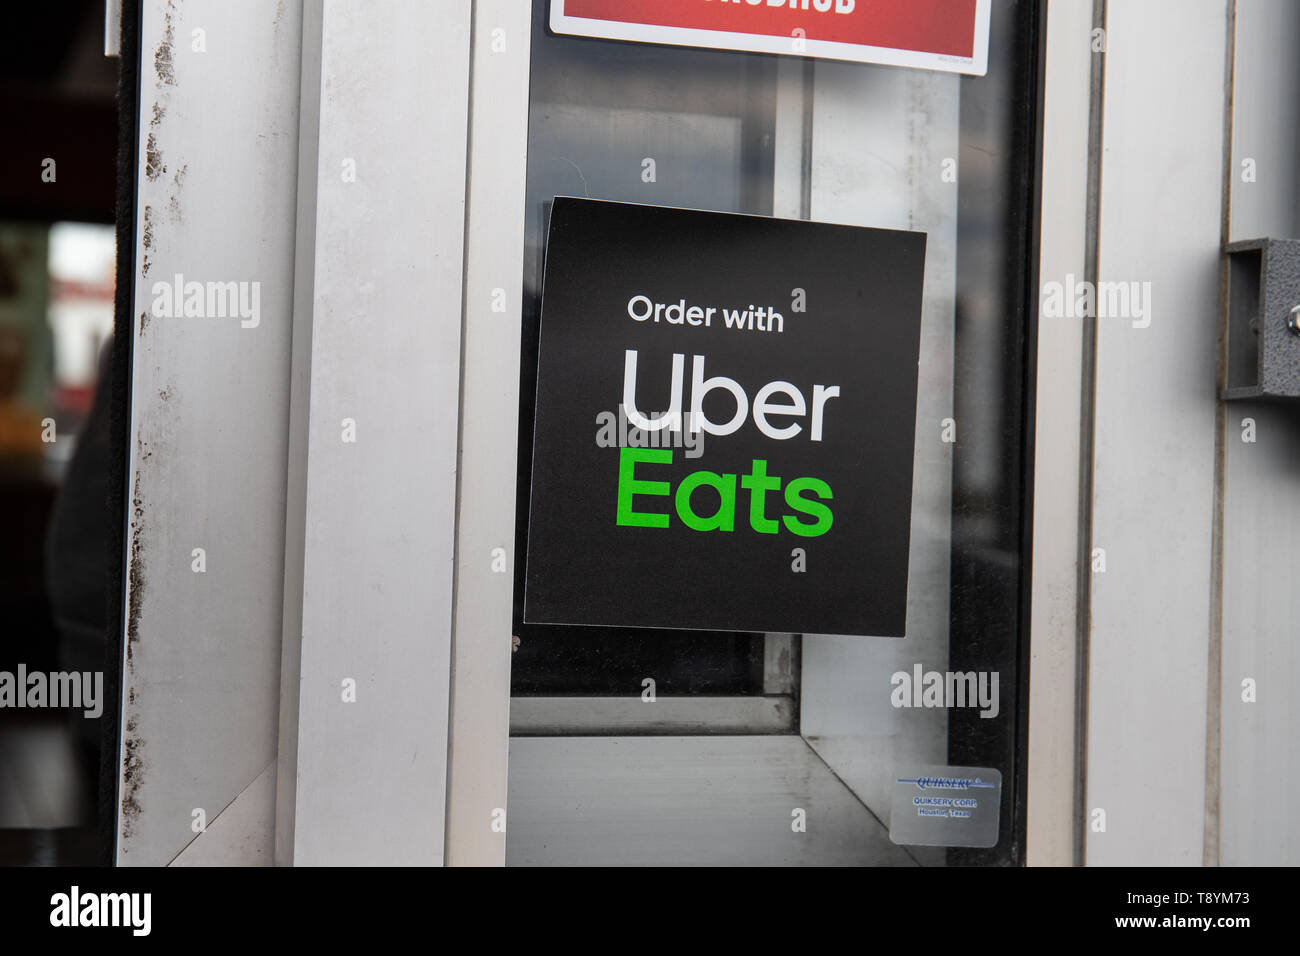 Indianapolis - Circa May 2019: Uber Eats badge on restaurant window. Uber Eats offers take out food delivery I Stock Photo